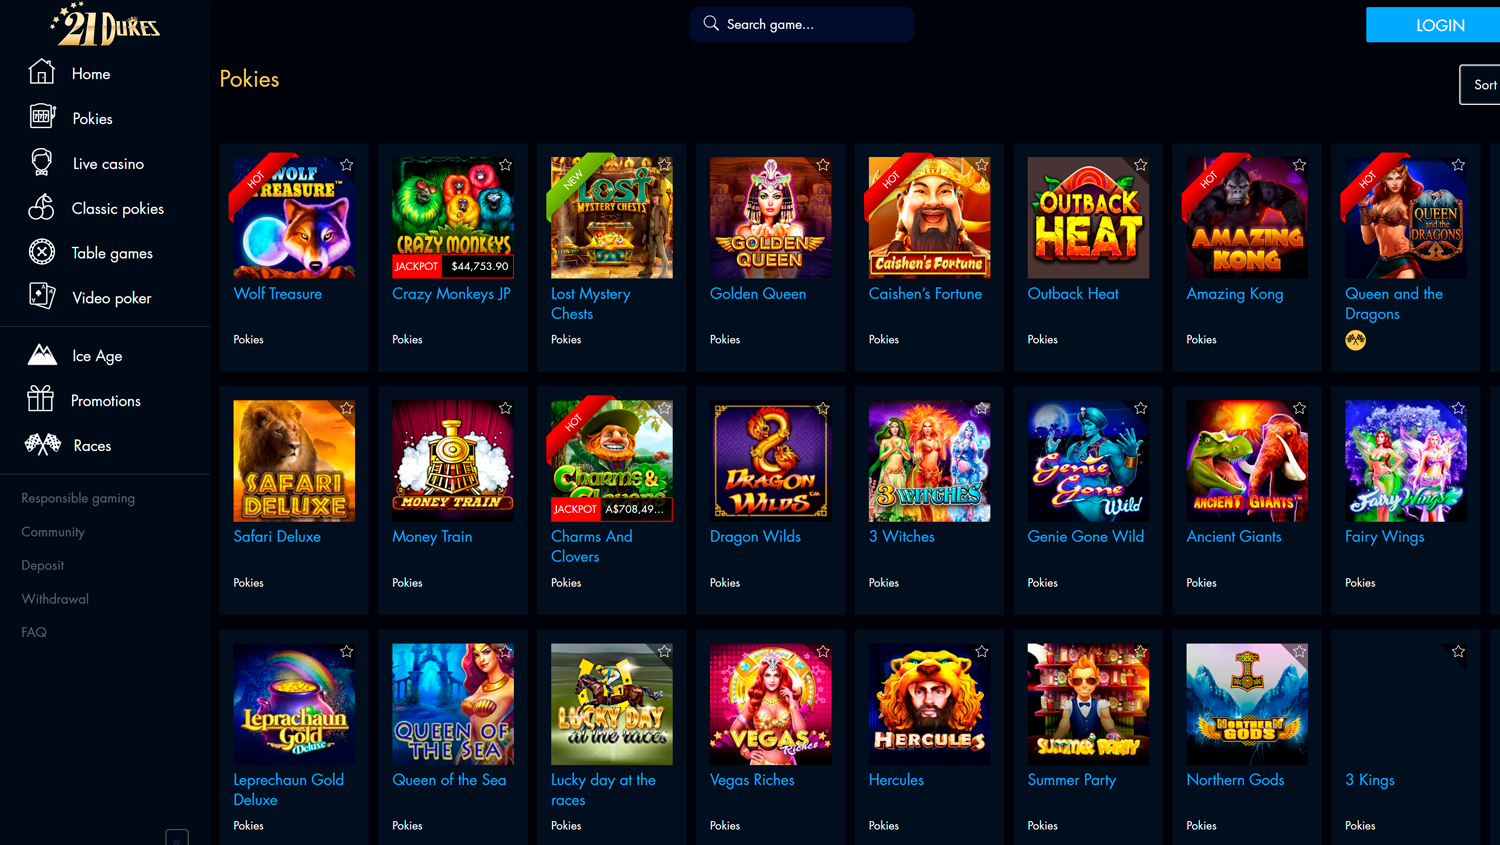 Pokies page of the 21Dukes casino site